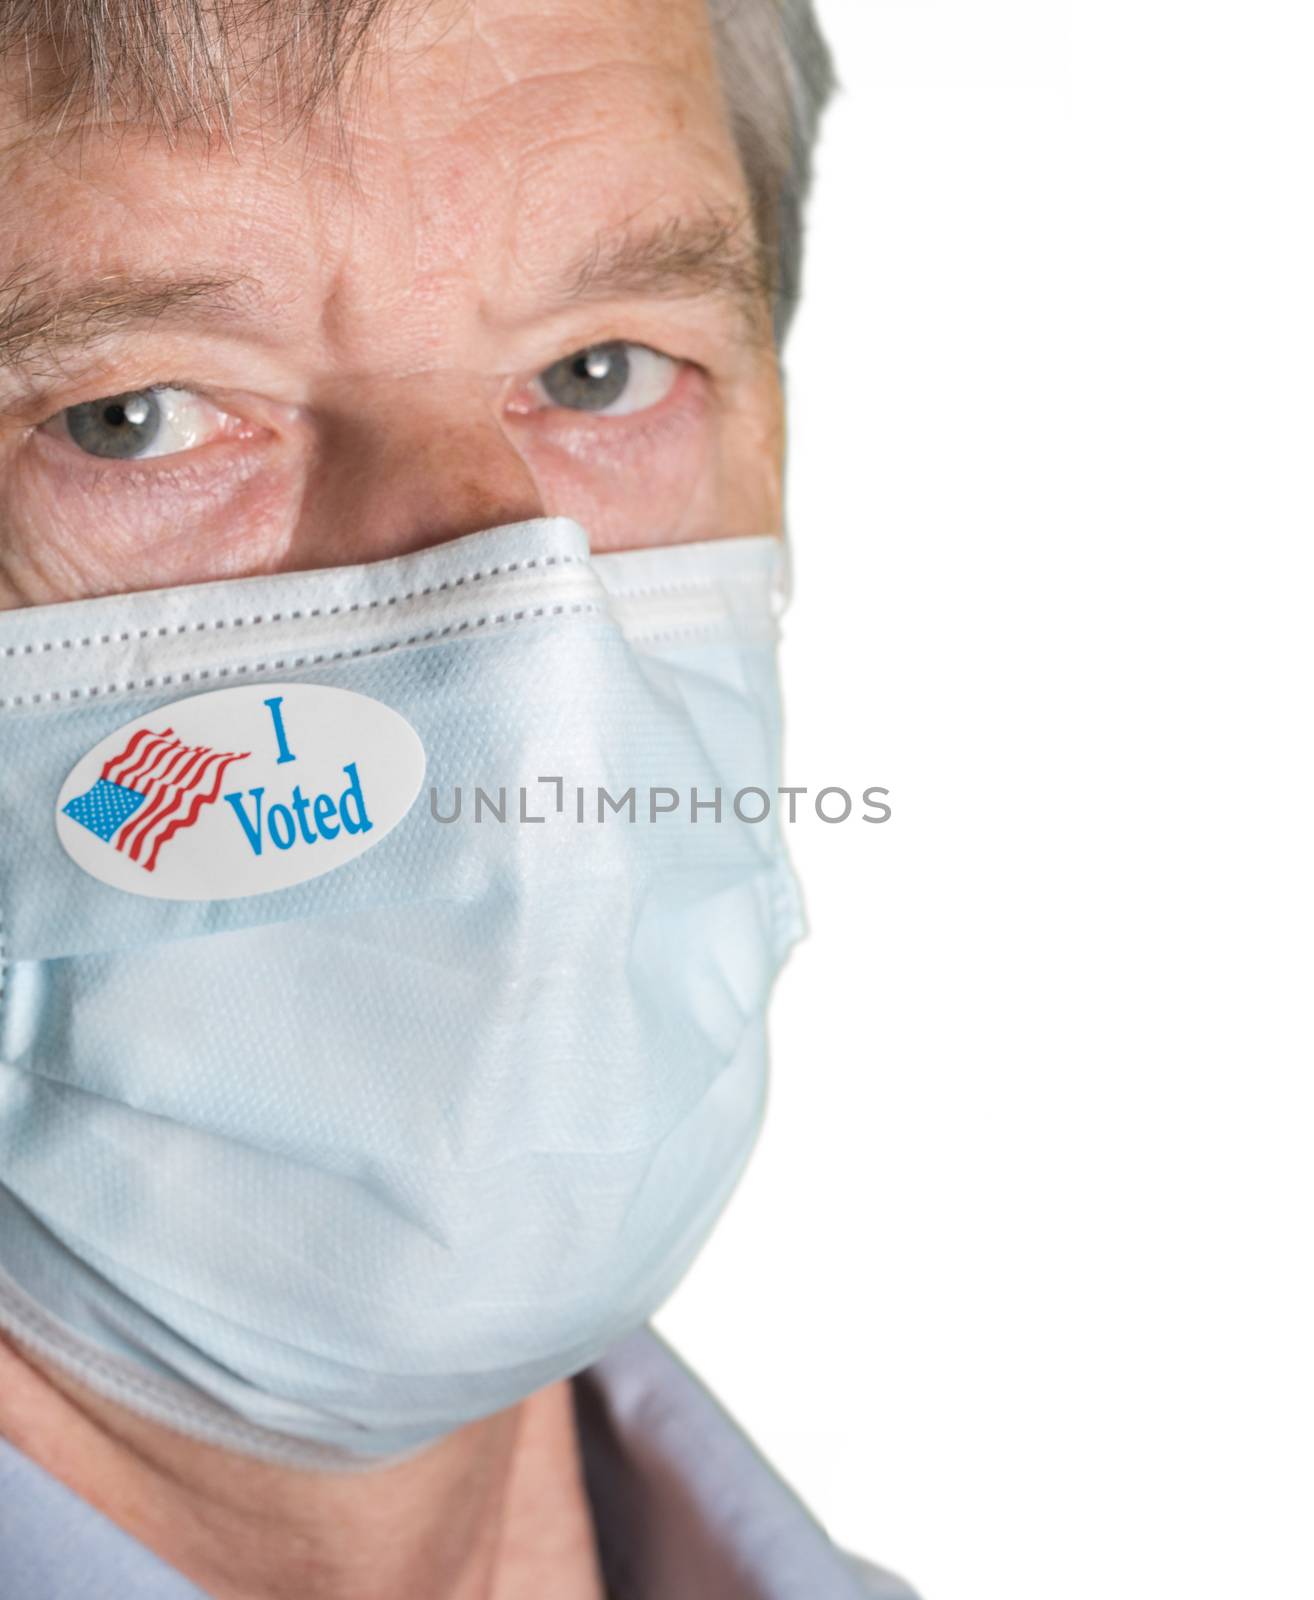 I Voted paper sticker on mans face mask against white background by steheap